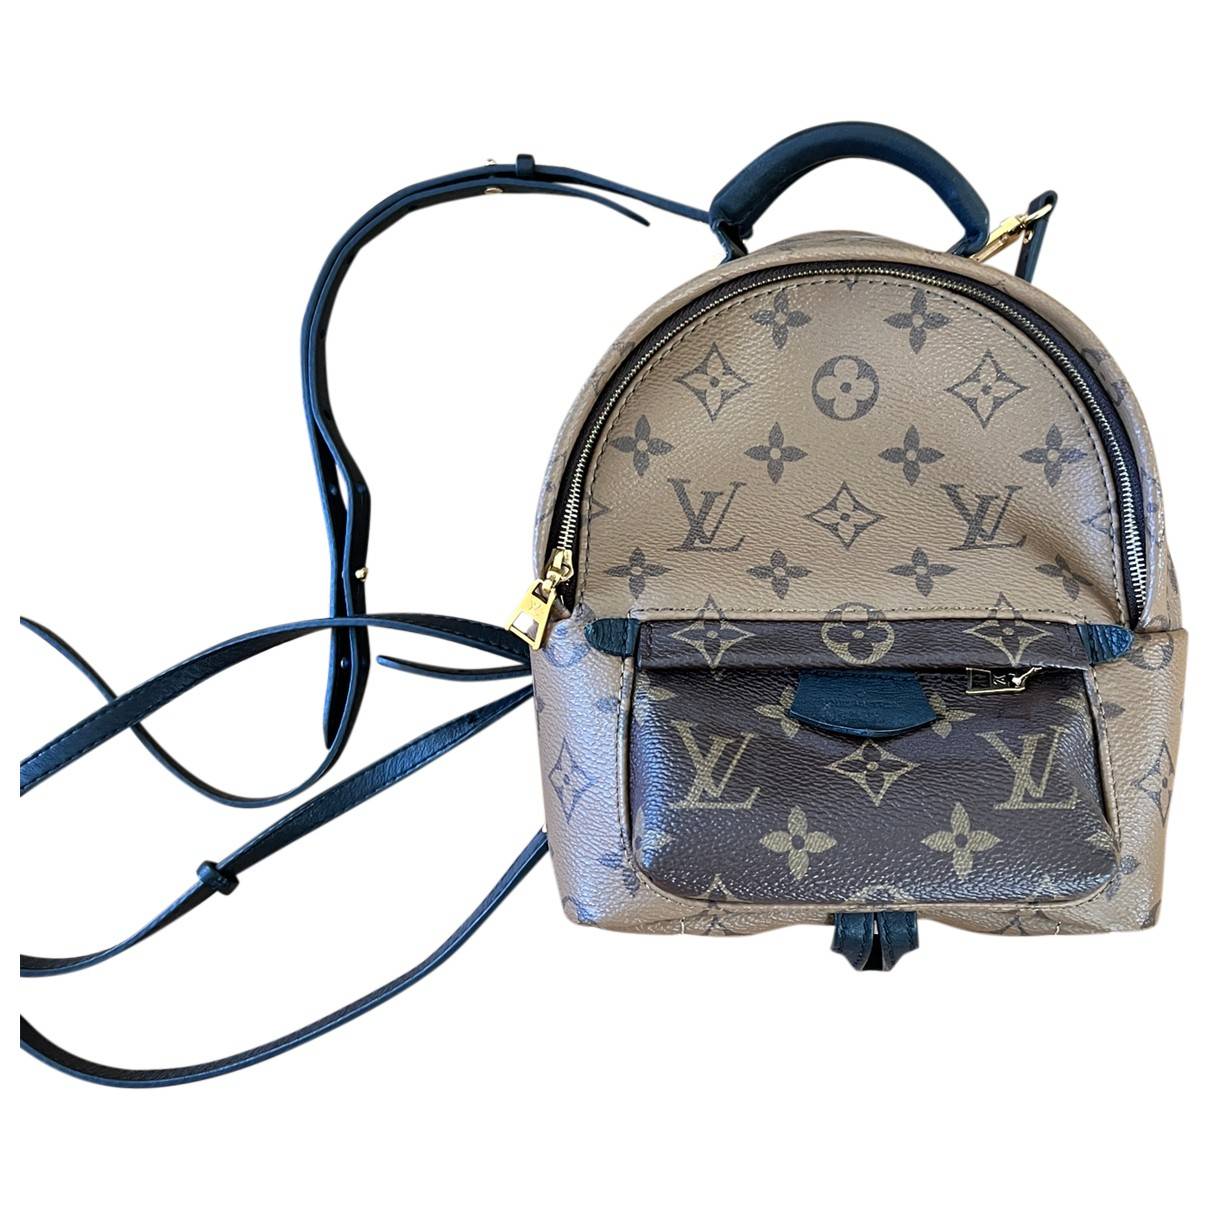 Palm springs leather backpack Louis Vuitton Brown in Leather - 36365123